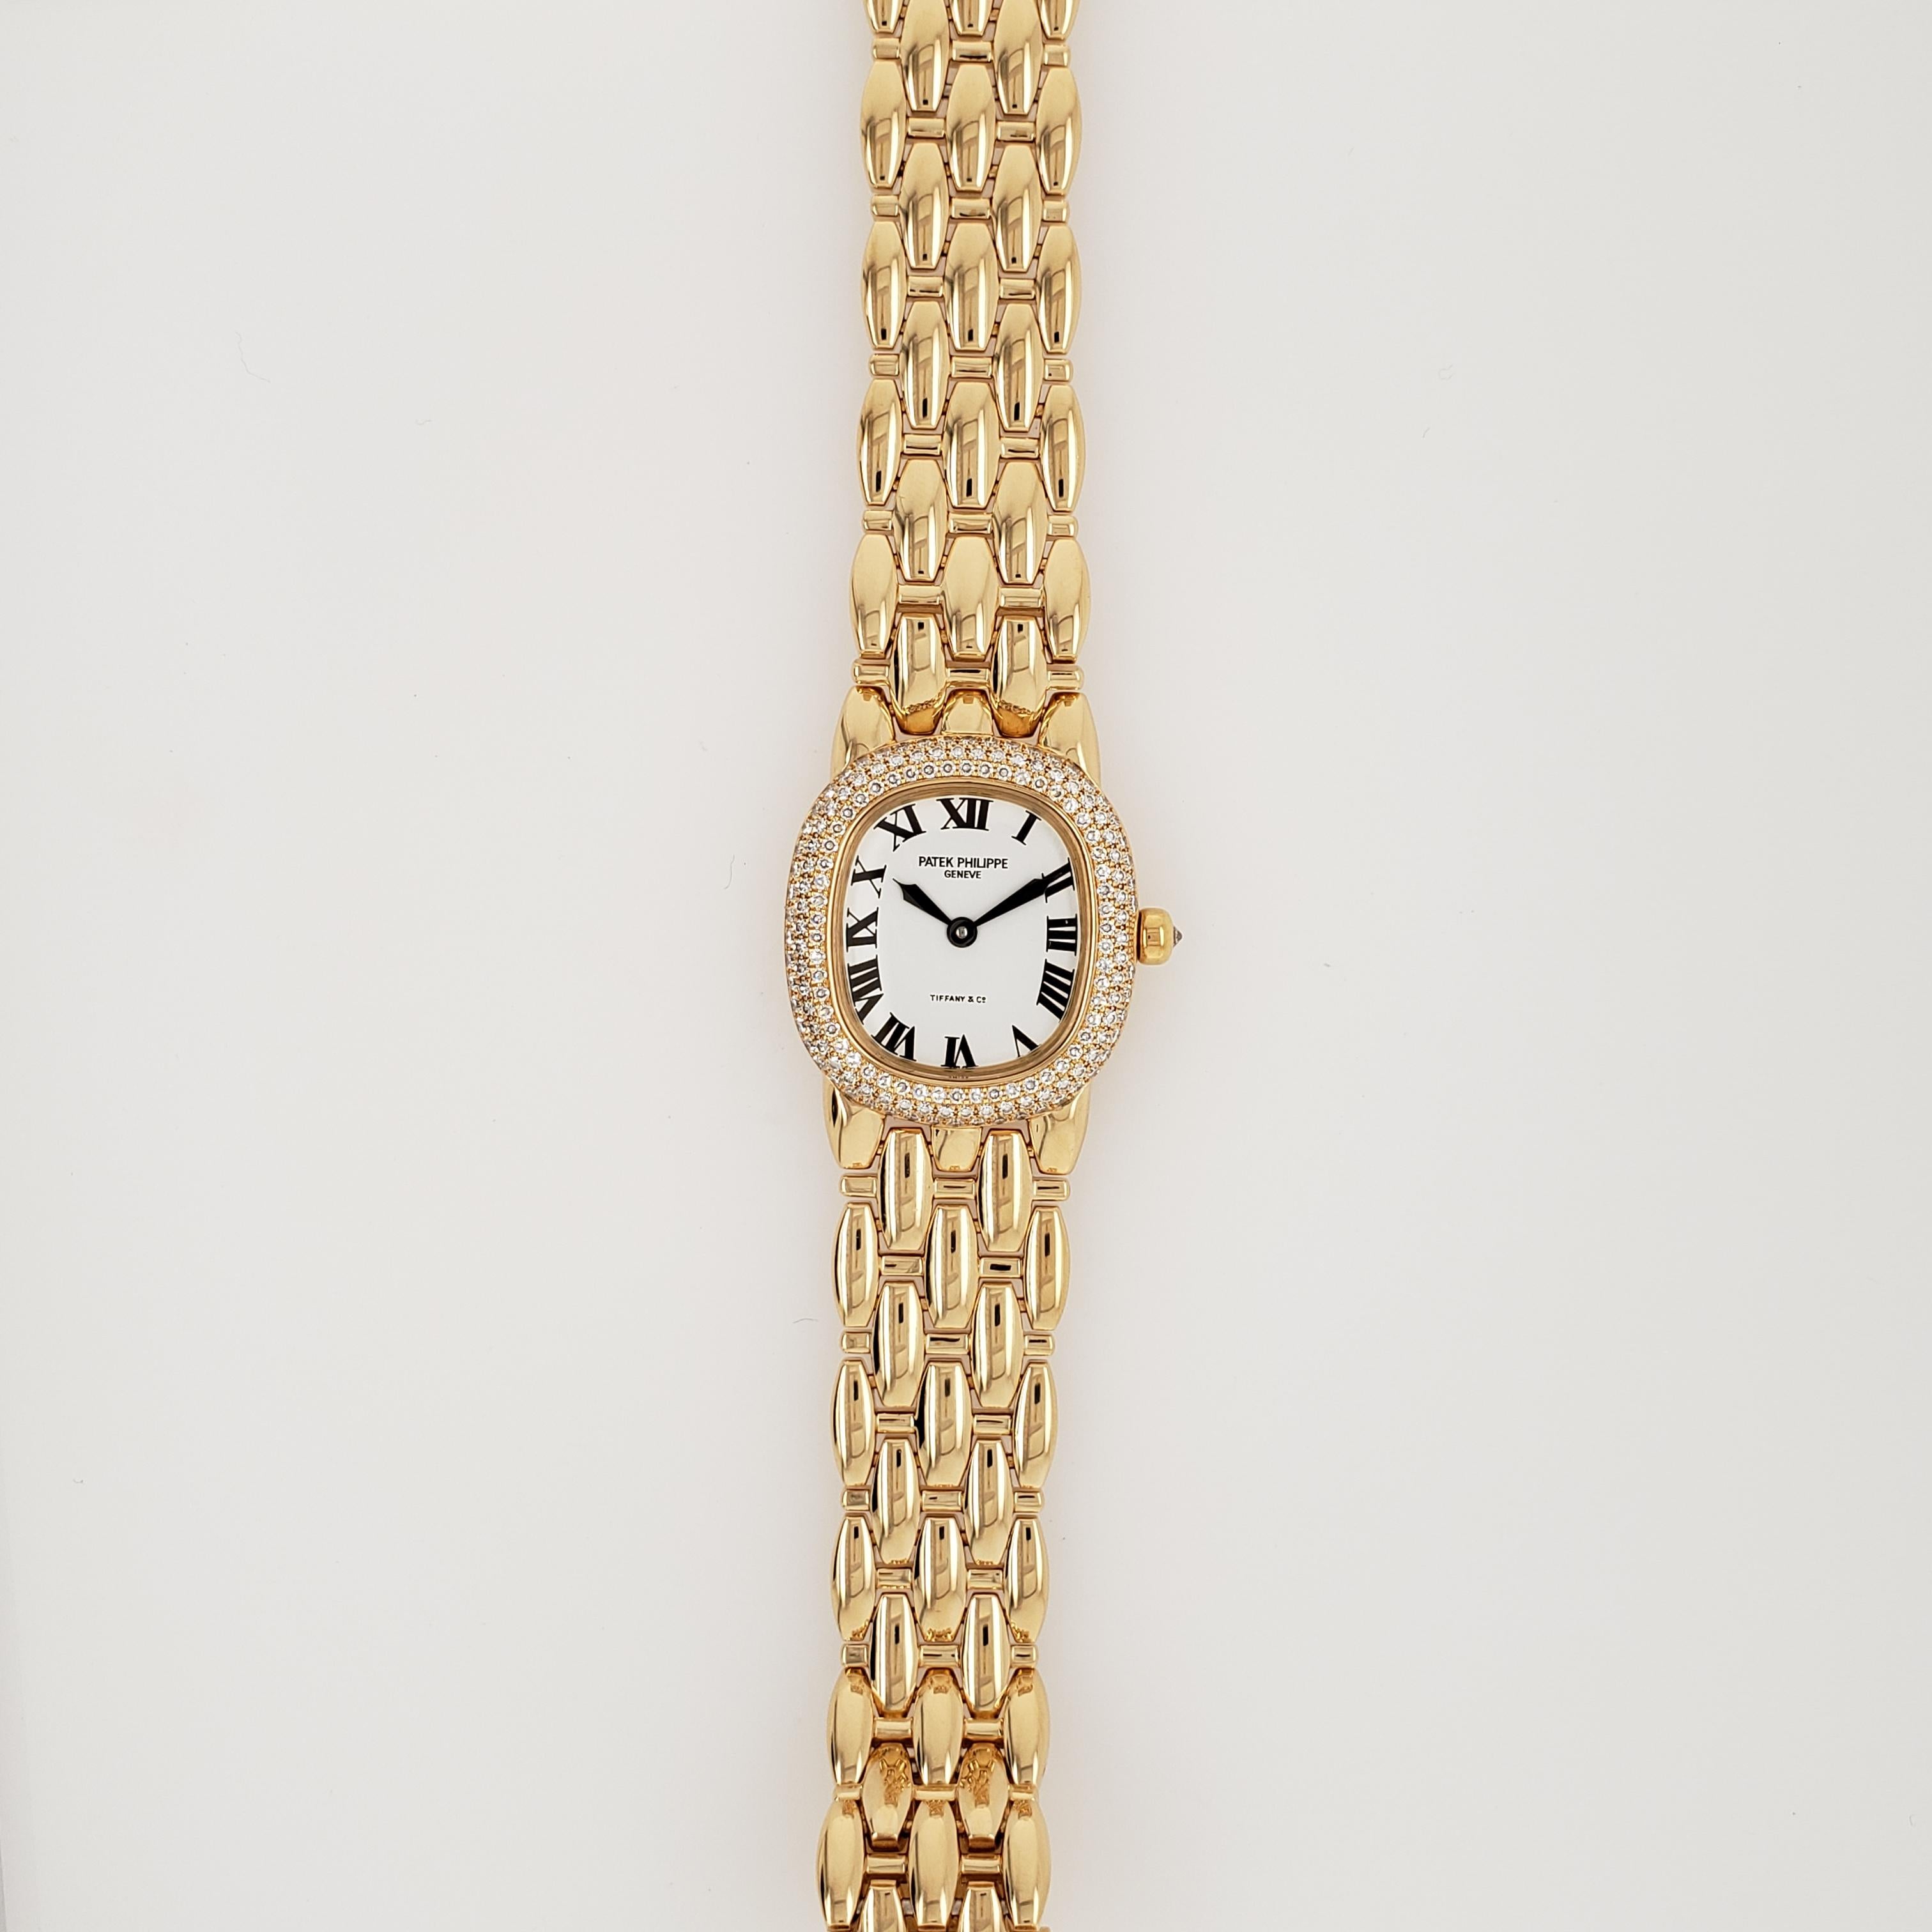 18kt Yellow Gold. Patek Philippe Ellipse Ref. 4831 watch. The watch features a white roman dial with a diamond bezel, a diamond crown, and a gold bracelet. Case diameter 25.5mm x 23mm (h x w). This watch has been fully overhauled & comes with a 1